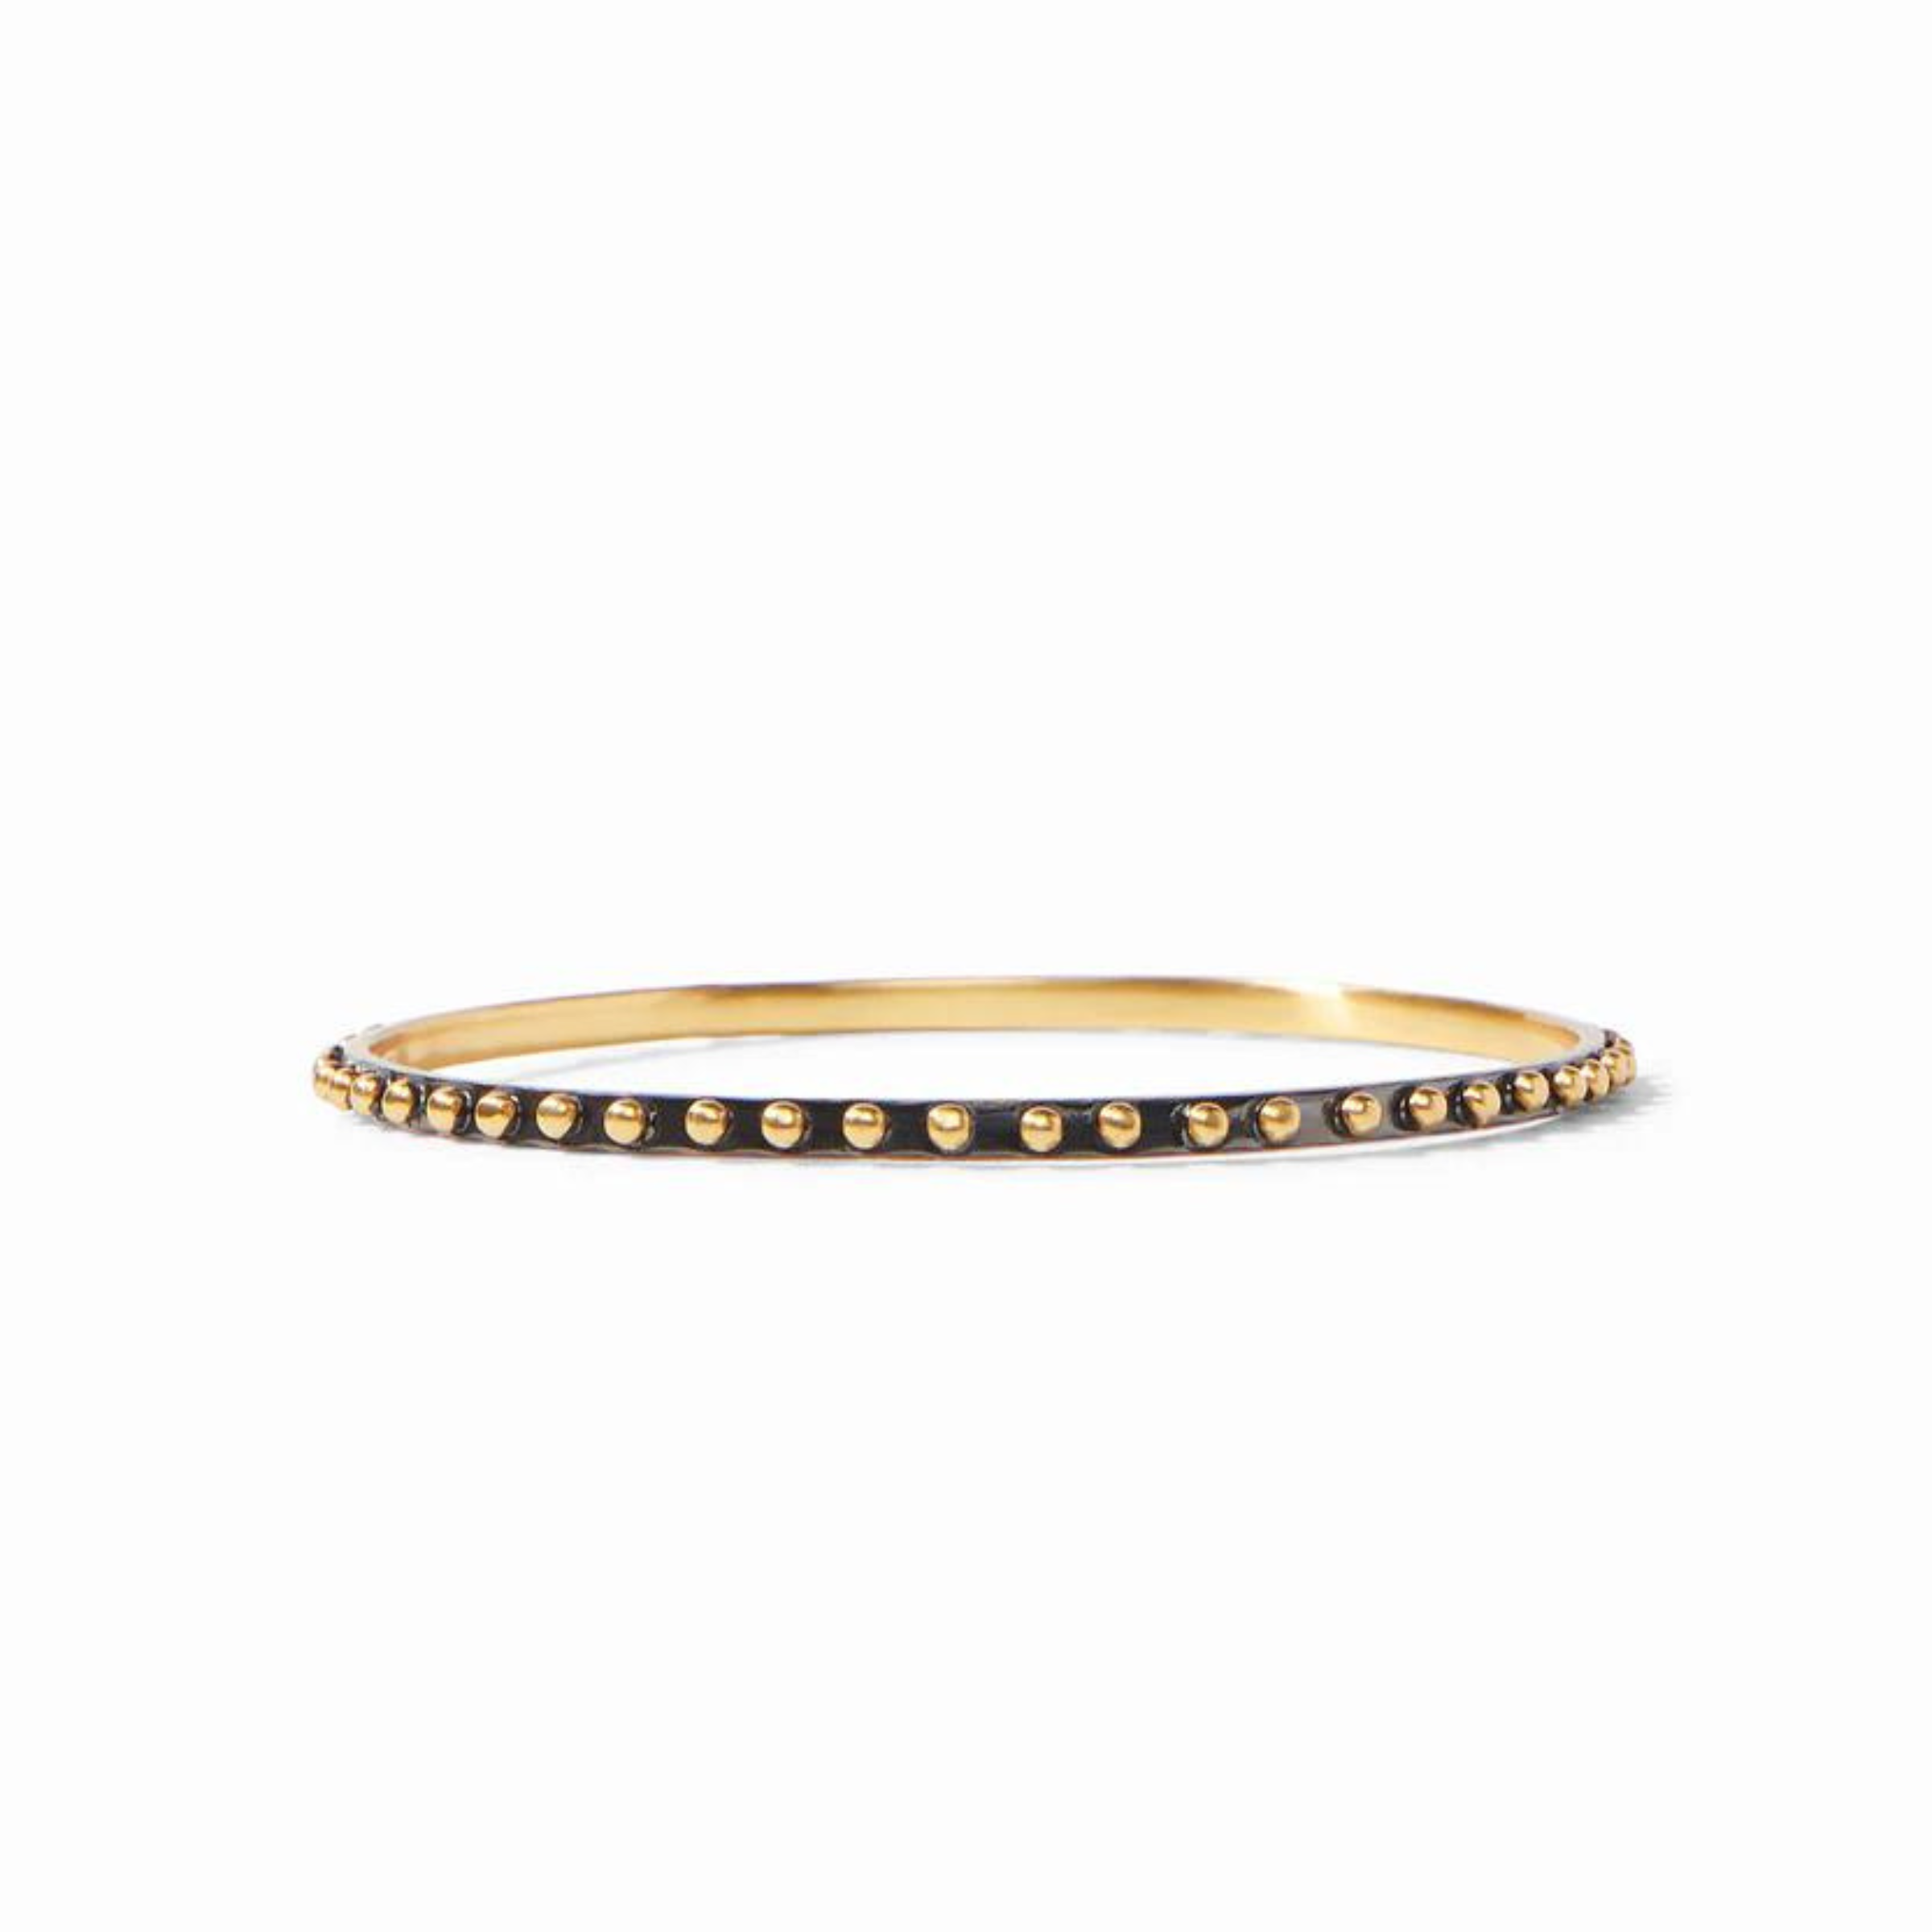 Julie Vos | SoHo Bangle in Mixed Metal - Giddy Up Glamour Boutique